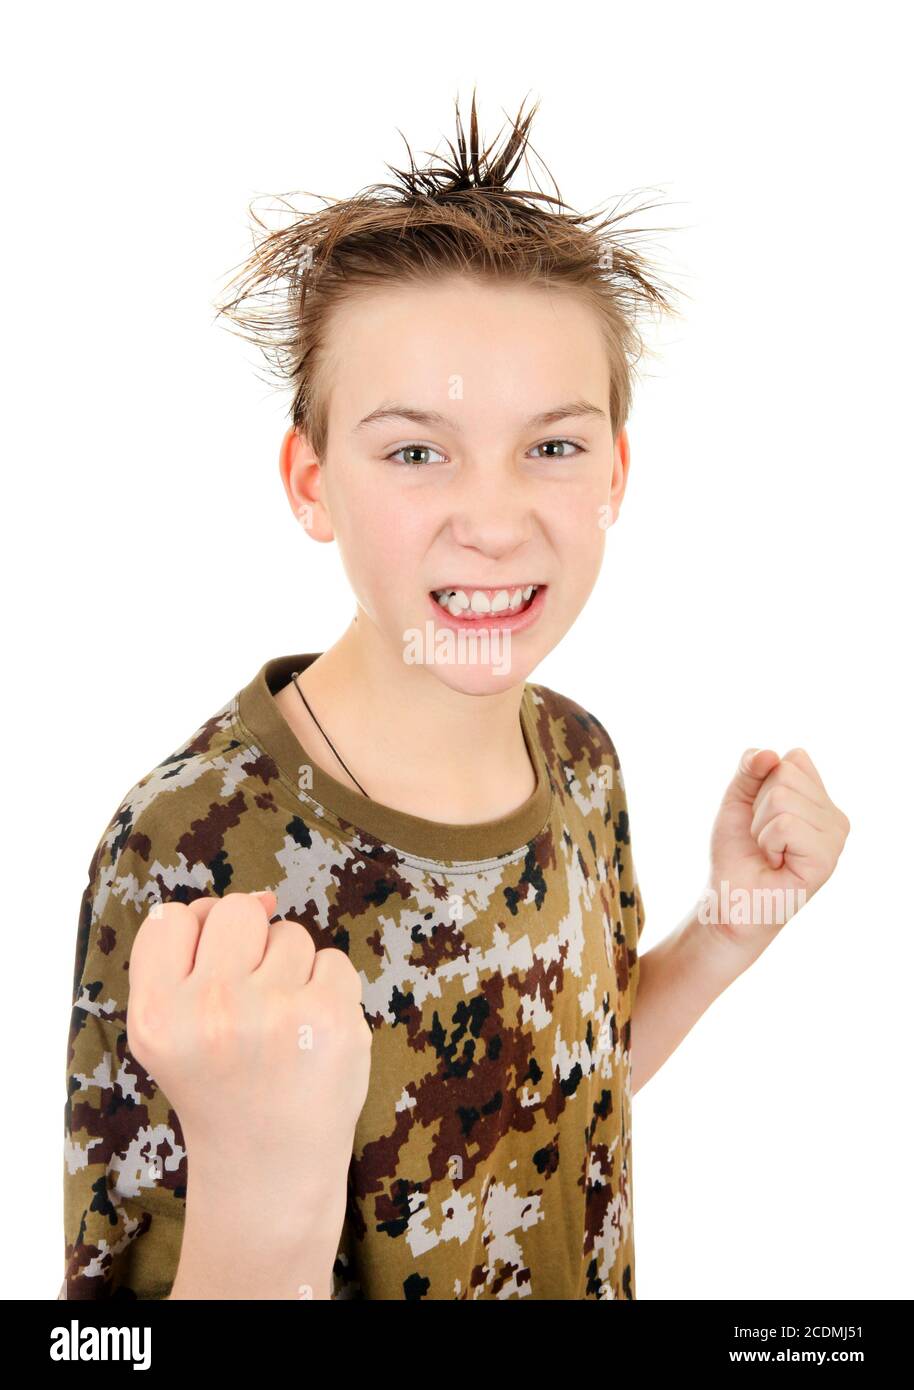 Angry Kid in Boxer Pose Stock Photo